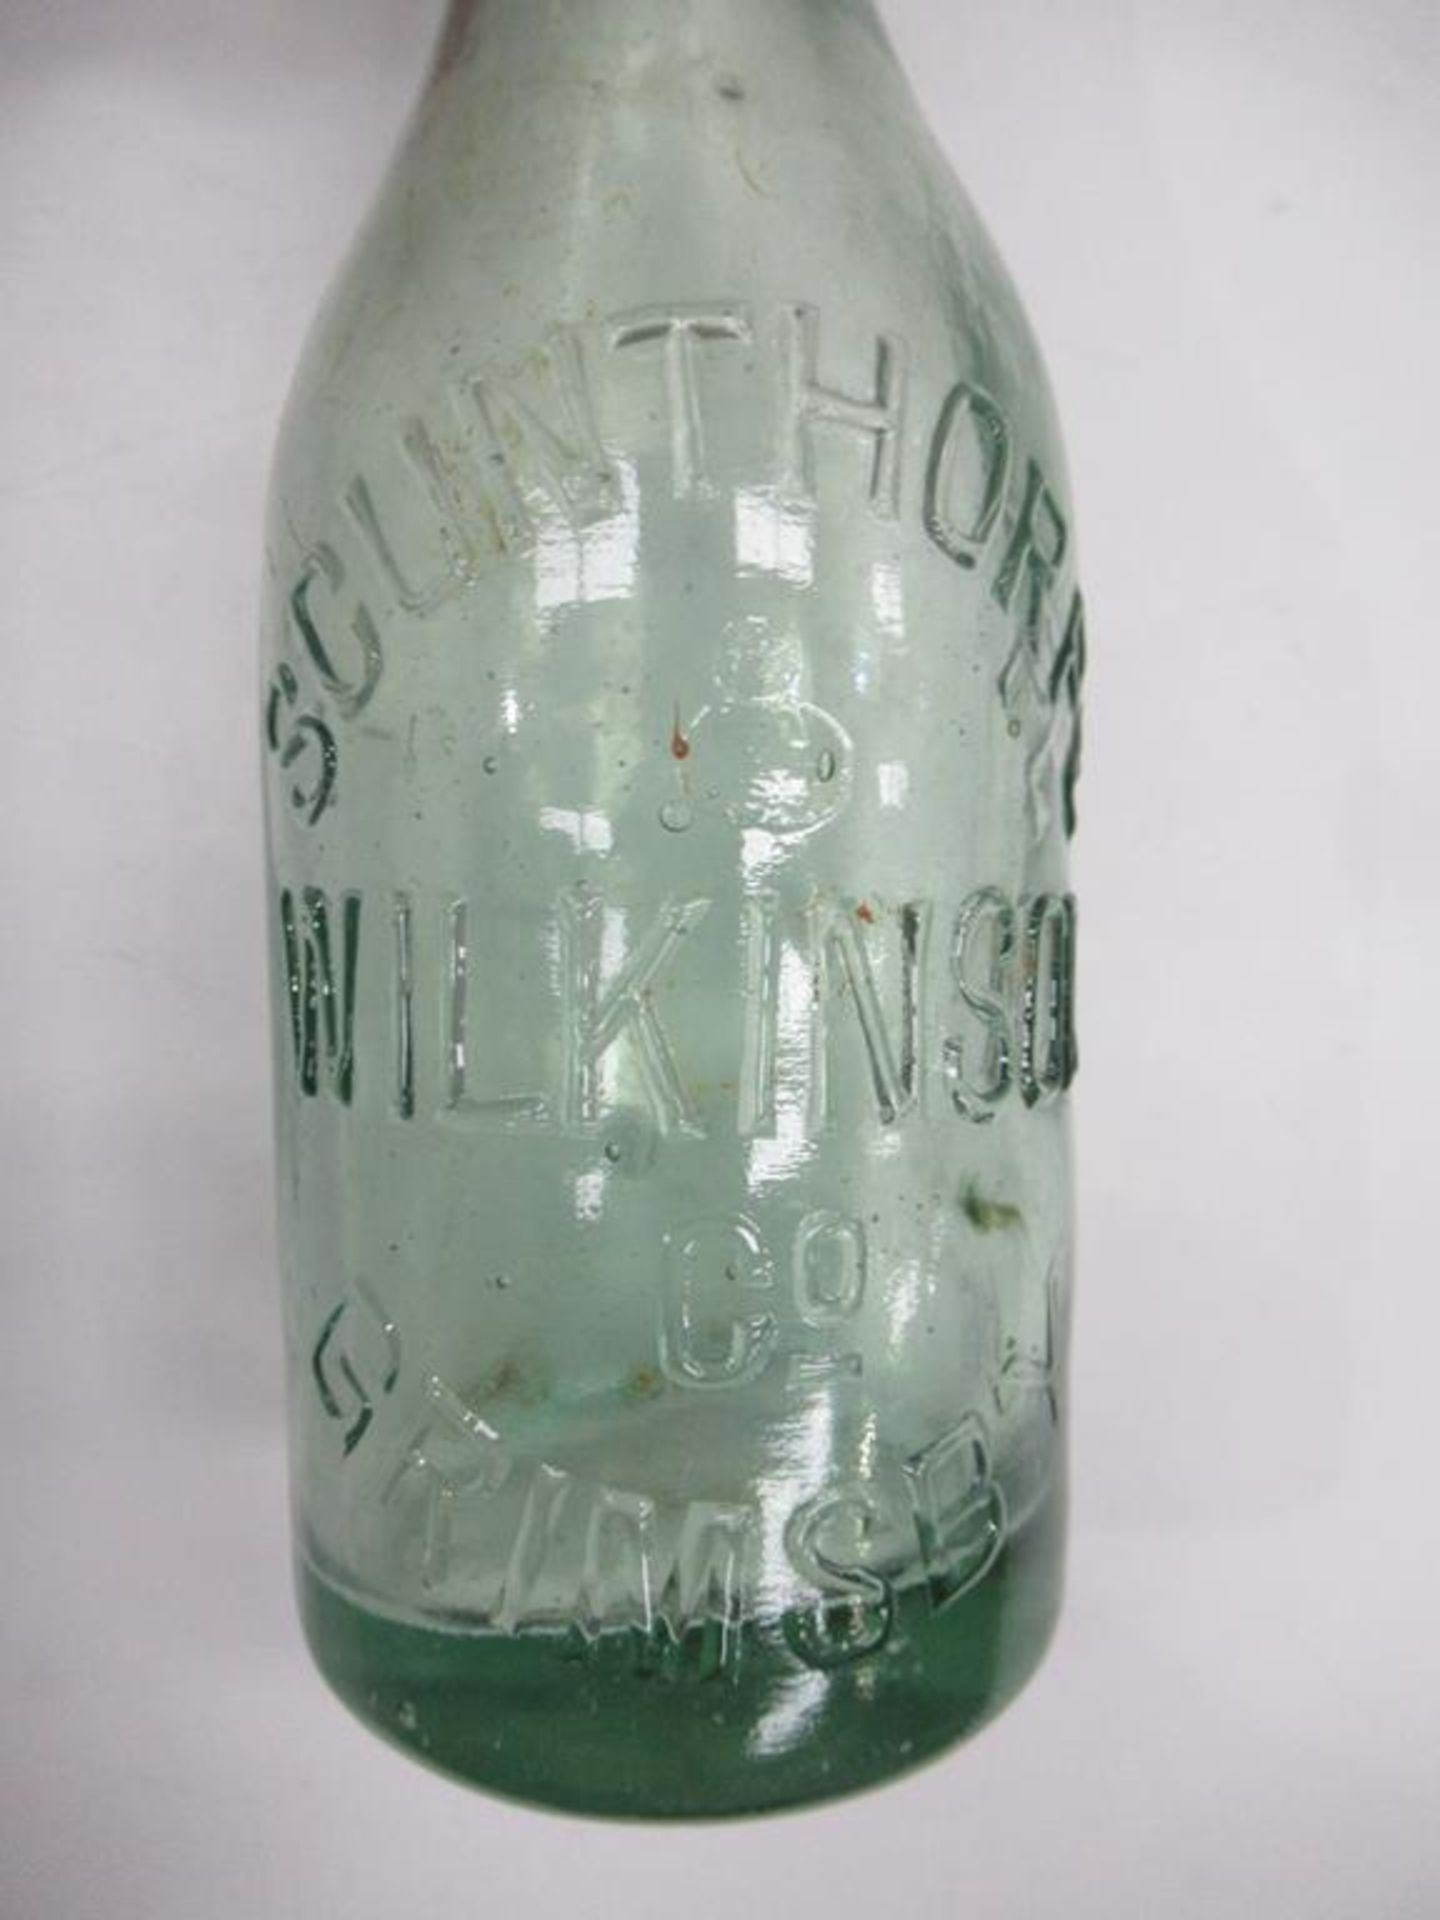 4x Grimsby (3x Scunthorpe) Wilkinsons & Co. bottles - Image 10 of 14